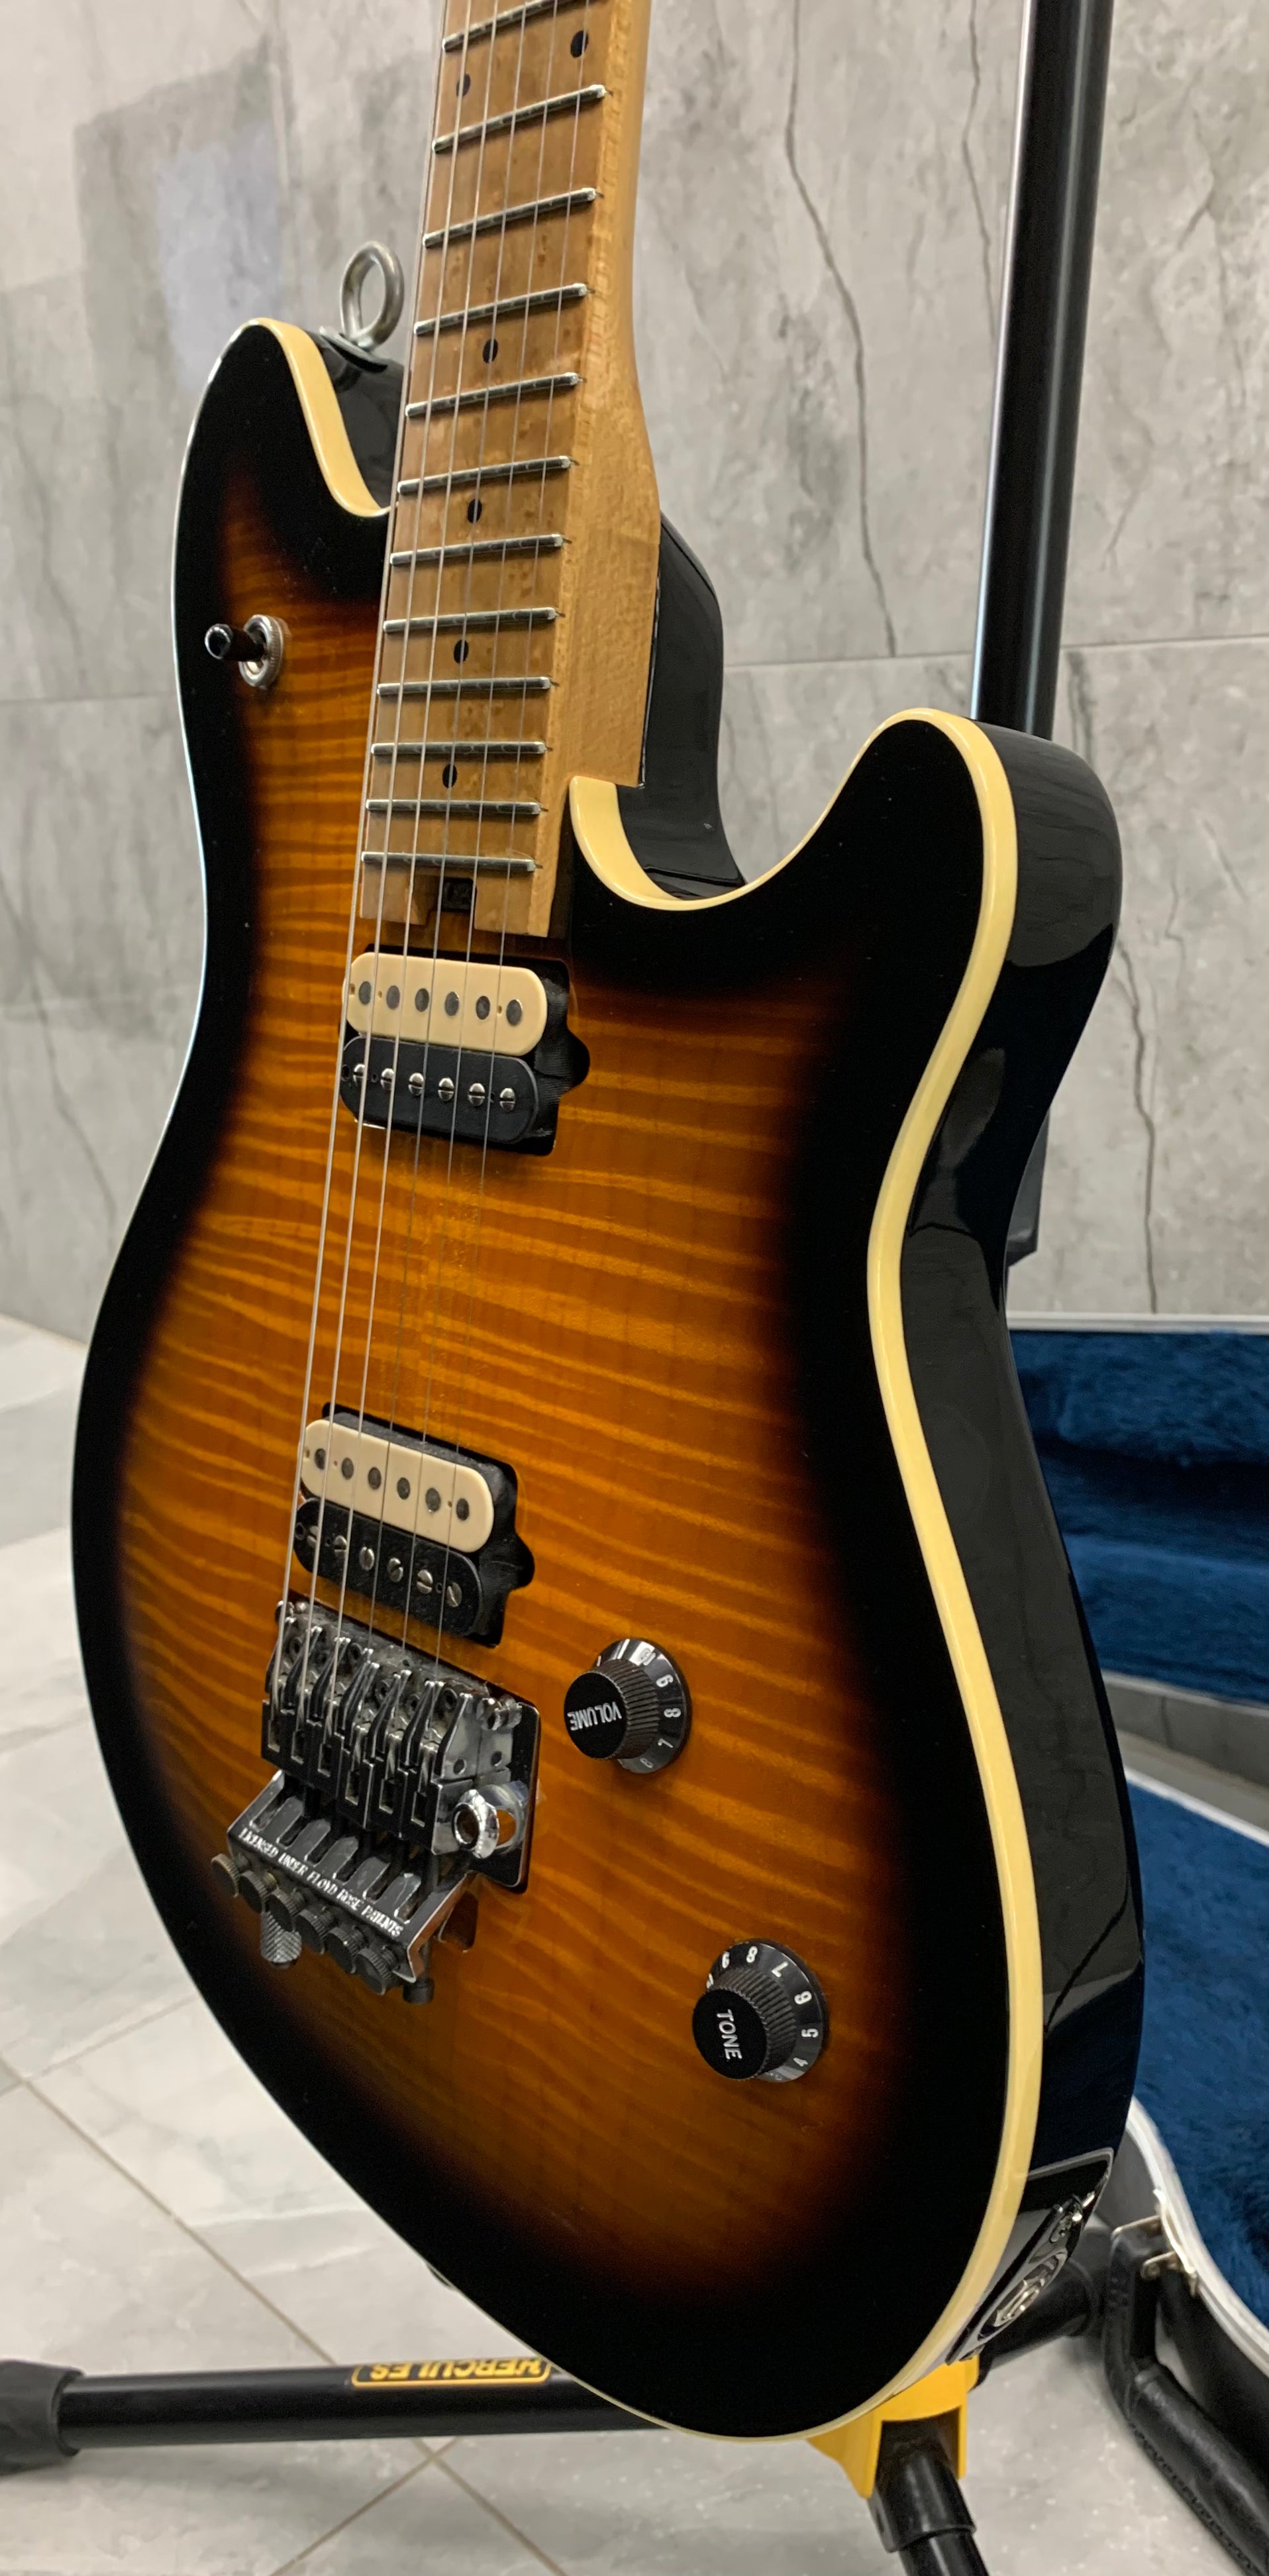 Peavey 1997 USA Wolfgang Standard in Tobacco Sunburst SERIAL NUMBER 91006026 USED EXCELLENT CONDITION